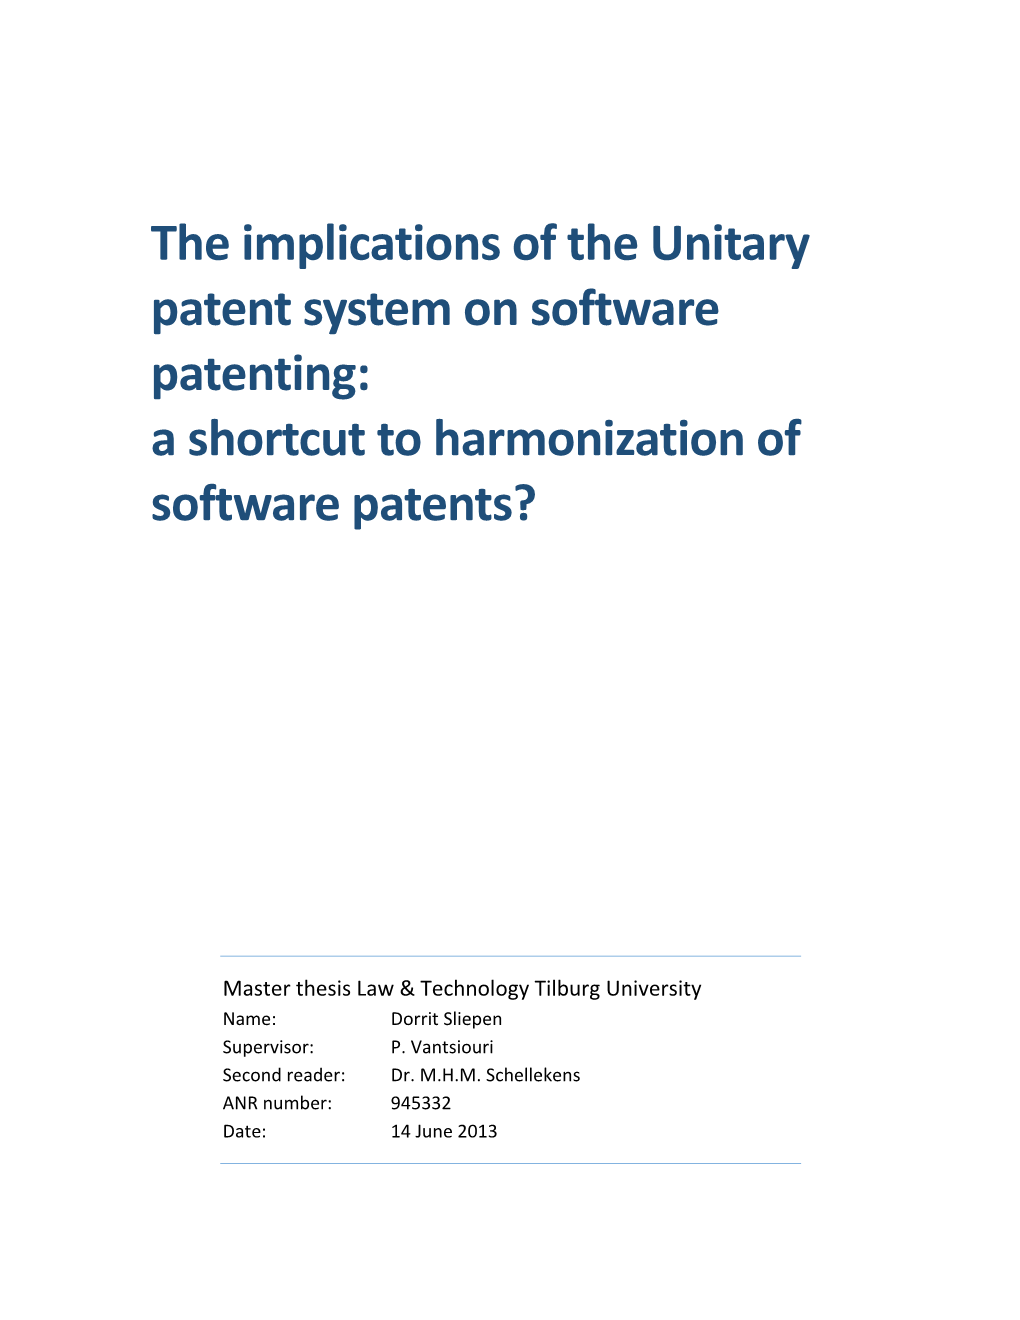 The Implications of the Unitary Patent System on Software Patenting: a Shortcut to Harmonization of Software Patents?